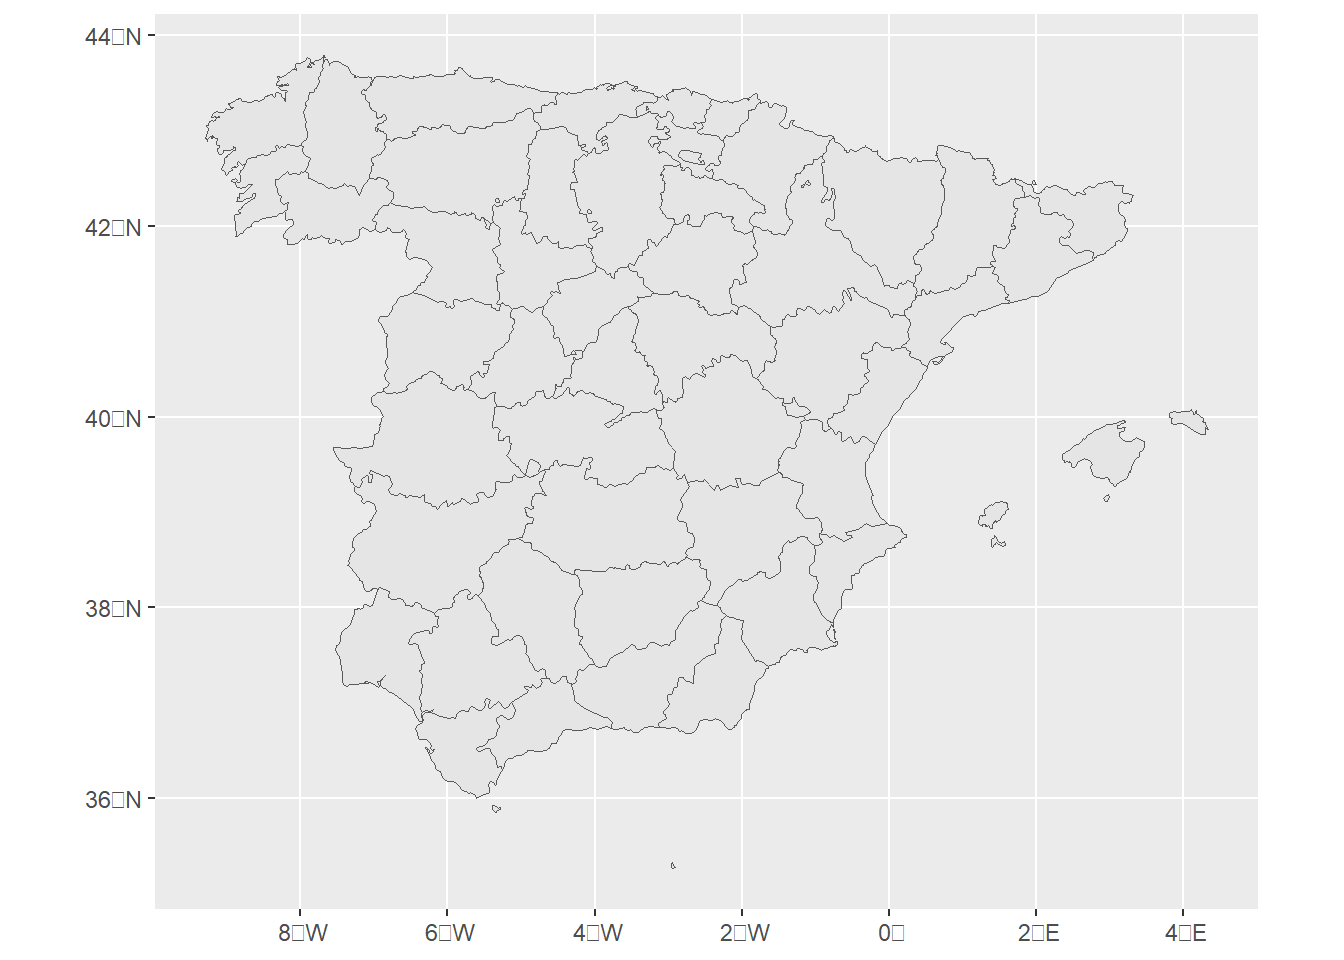 Map of Spain excluding the Canary Islands region obtained from **rnaturalearth**.